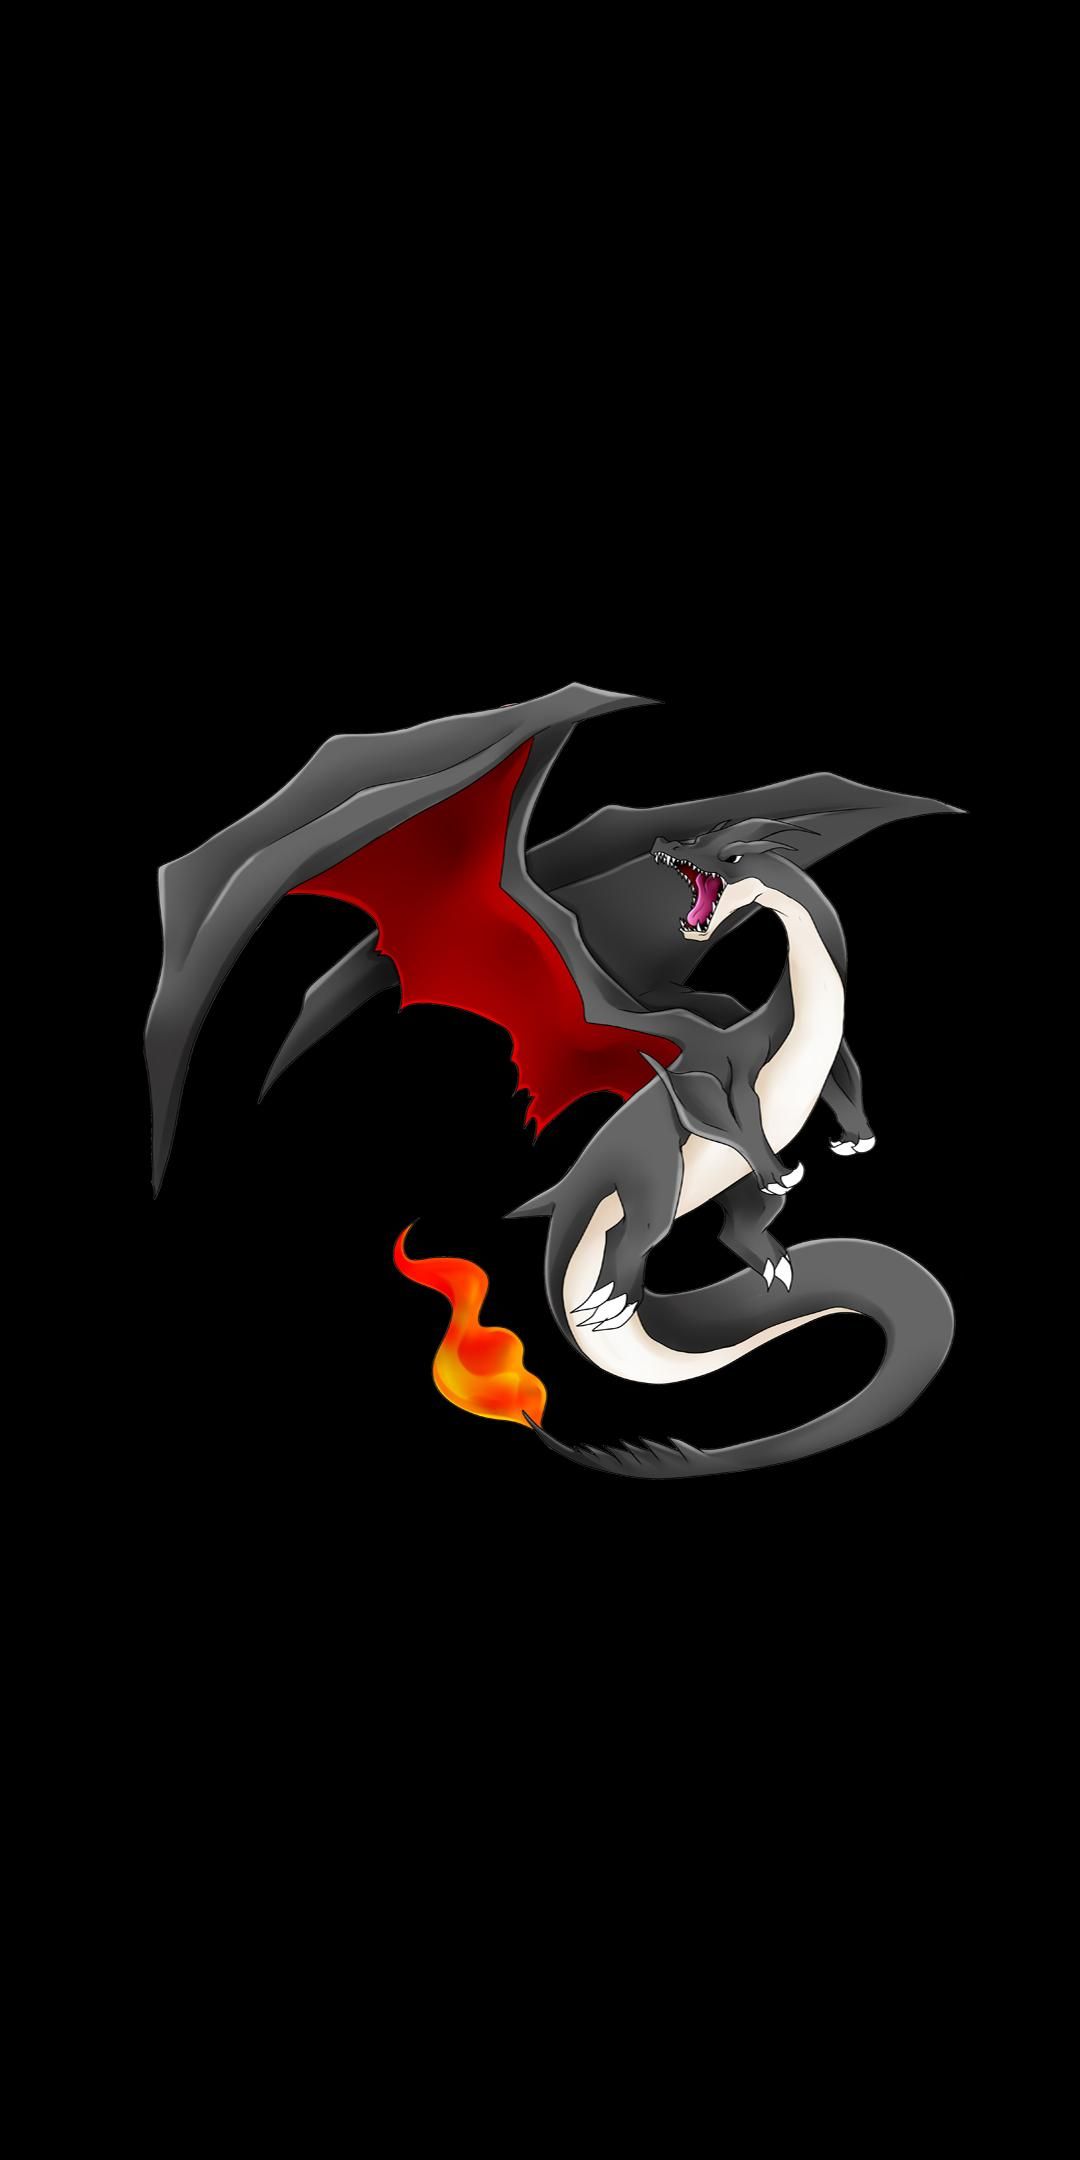 Shiny charizard. Made for one plus 5. (1080x2160)